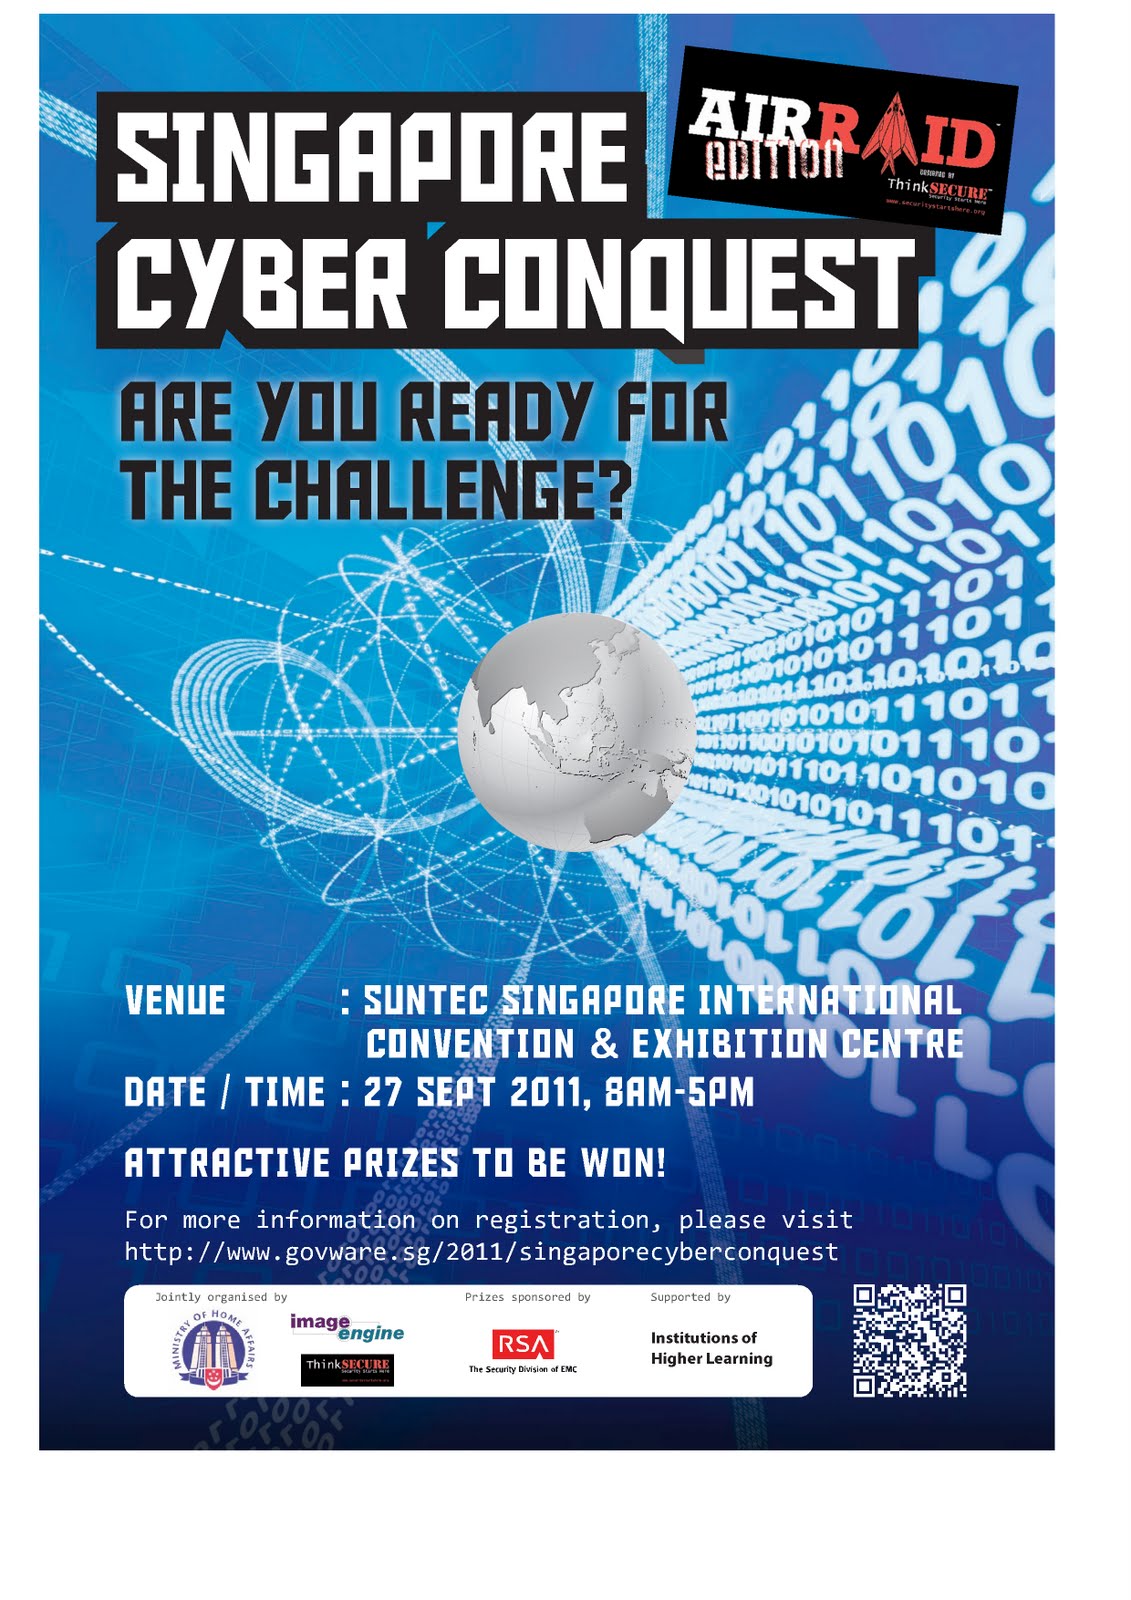 AwesomeAsh: Singapore Cyber Conquest (